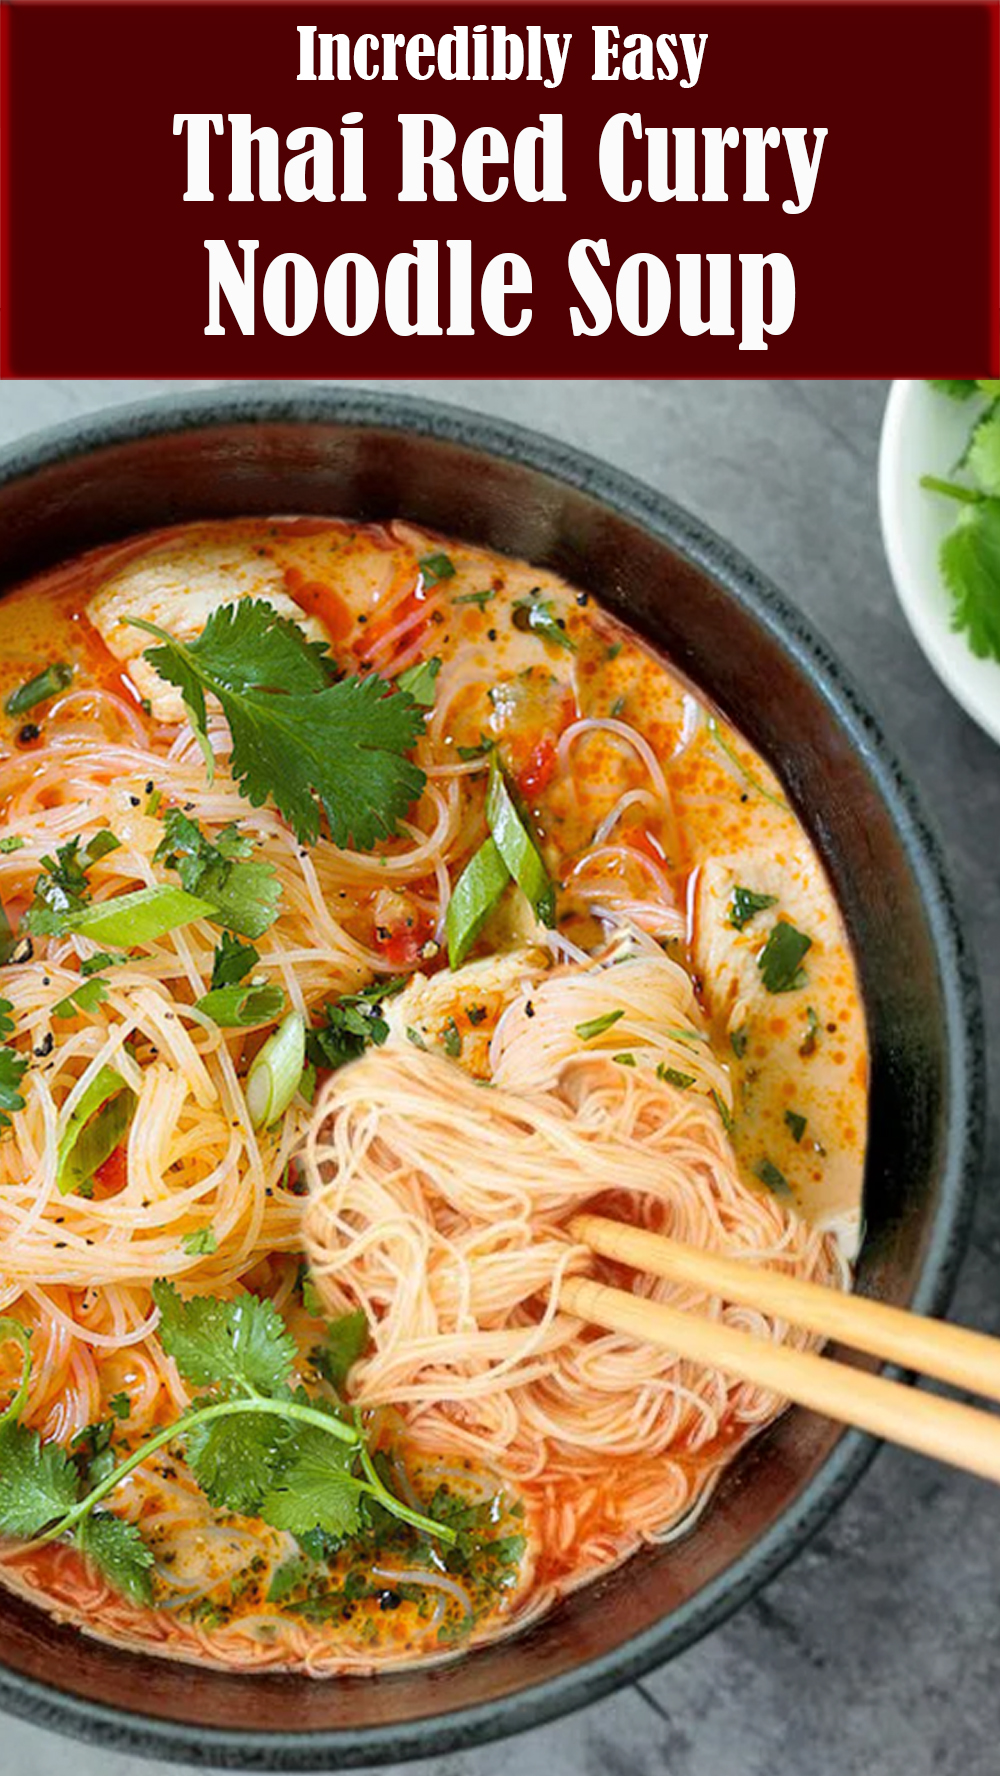 Incredibly Easy Thai Red Curry Noodle Soup